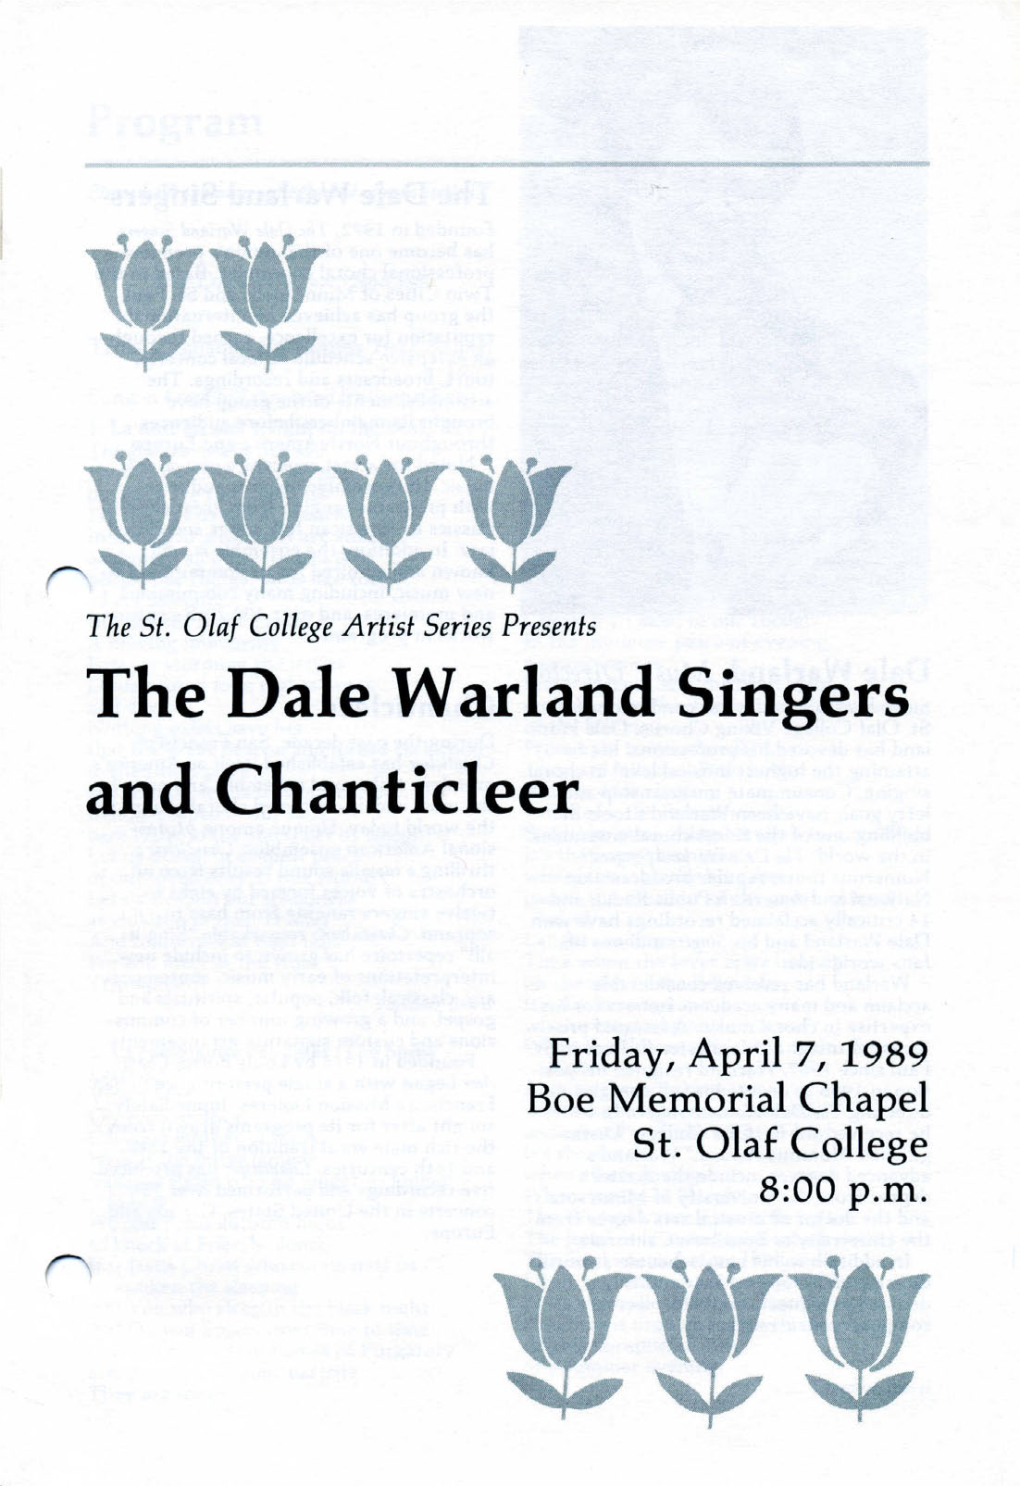 The Dale Warland Singers and Chanticleer